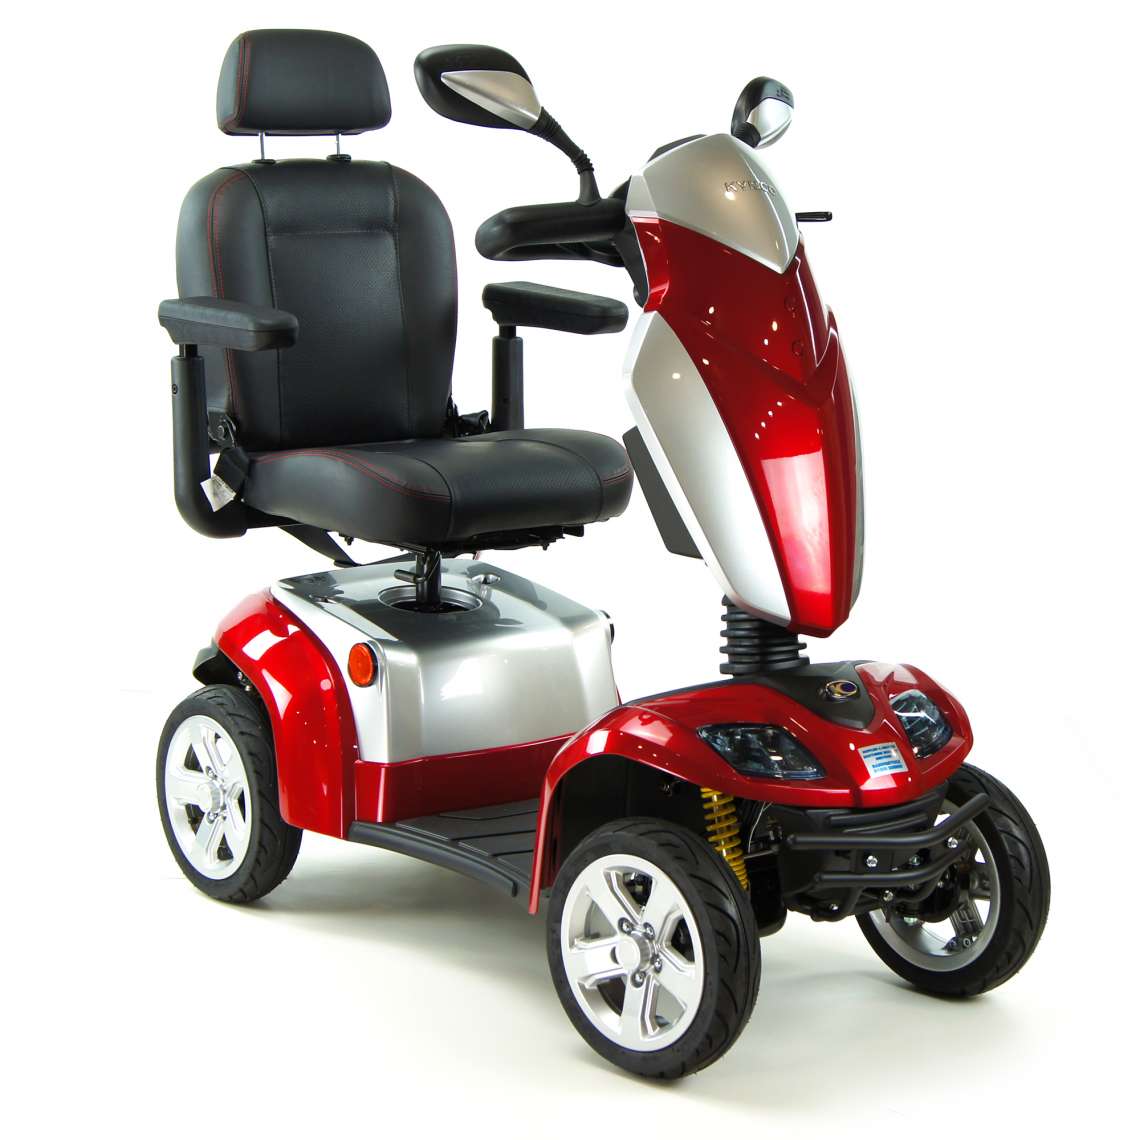 Kymco Agility 8mph Mobility Scooter